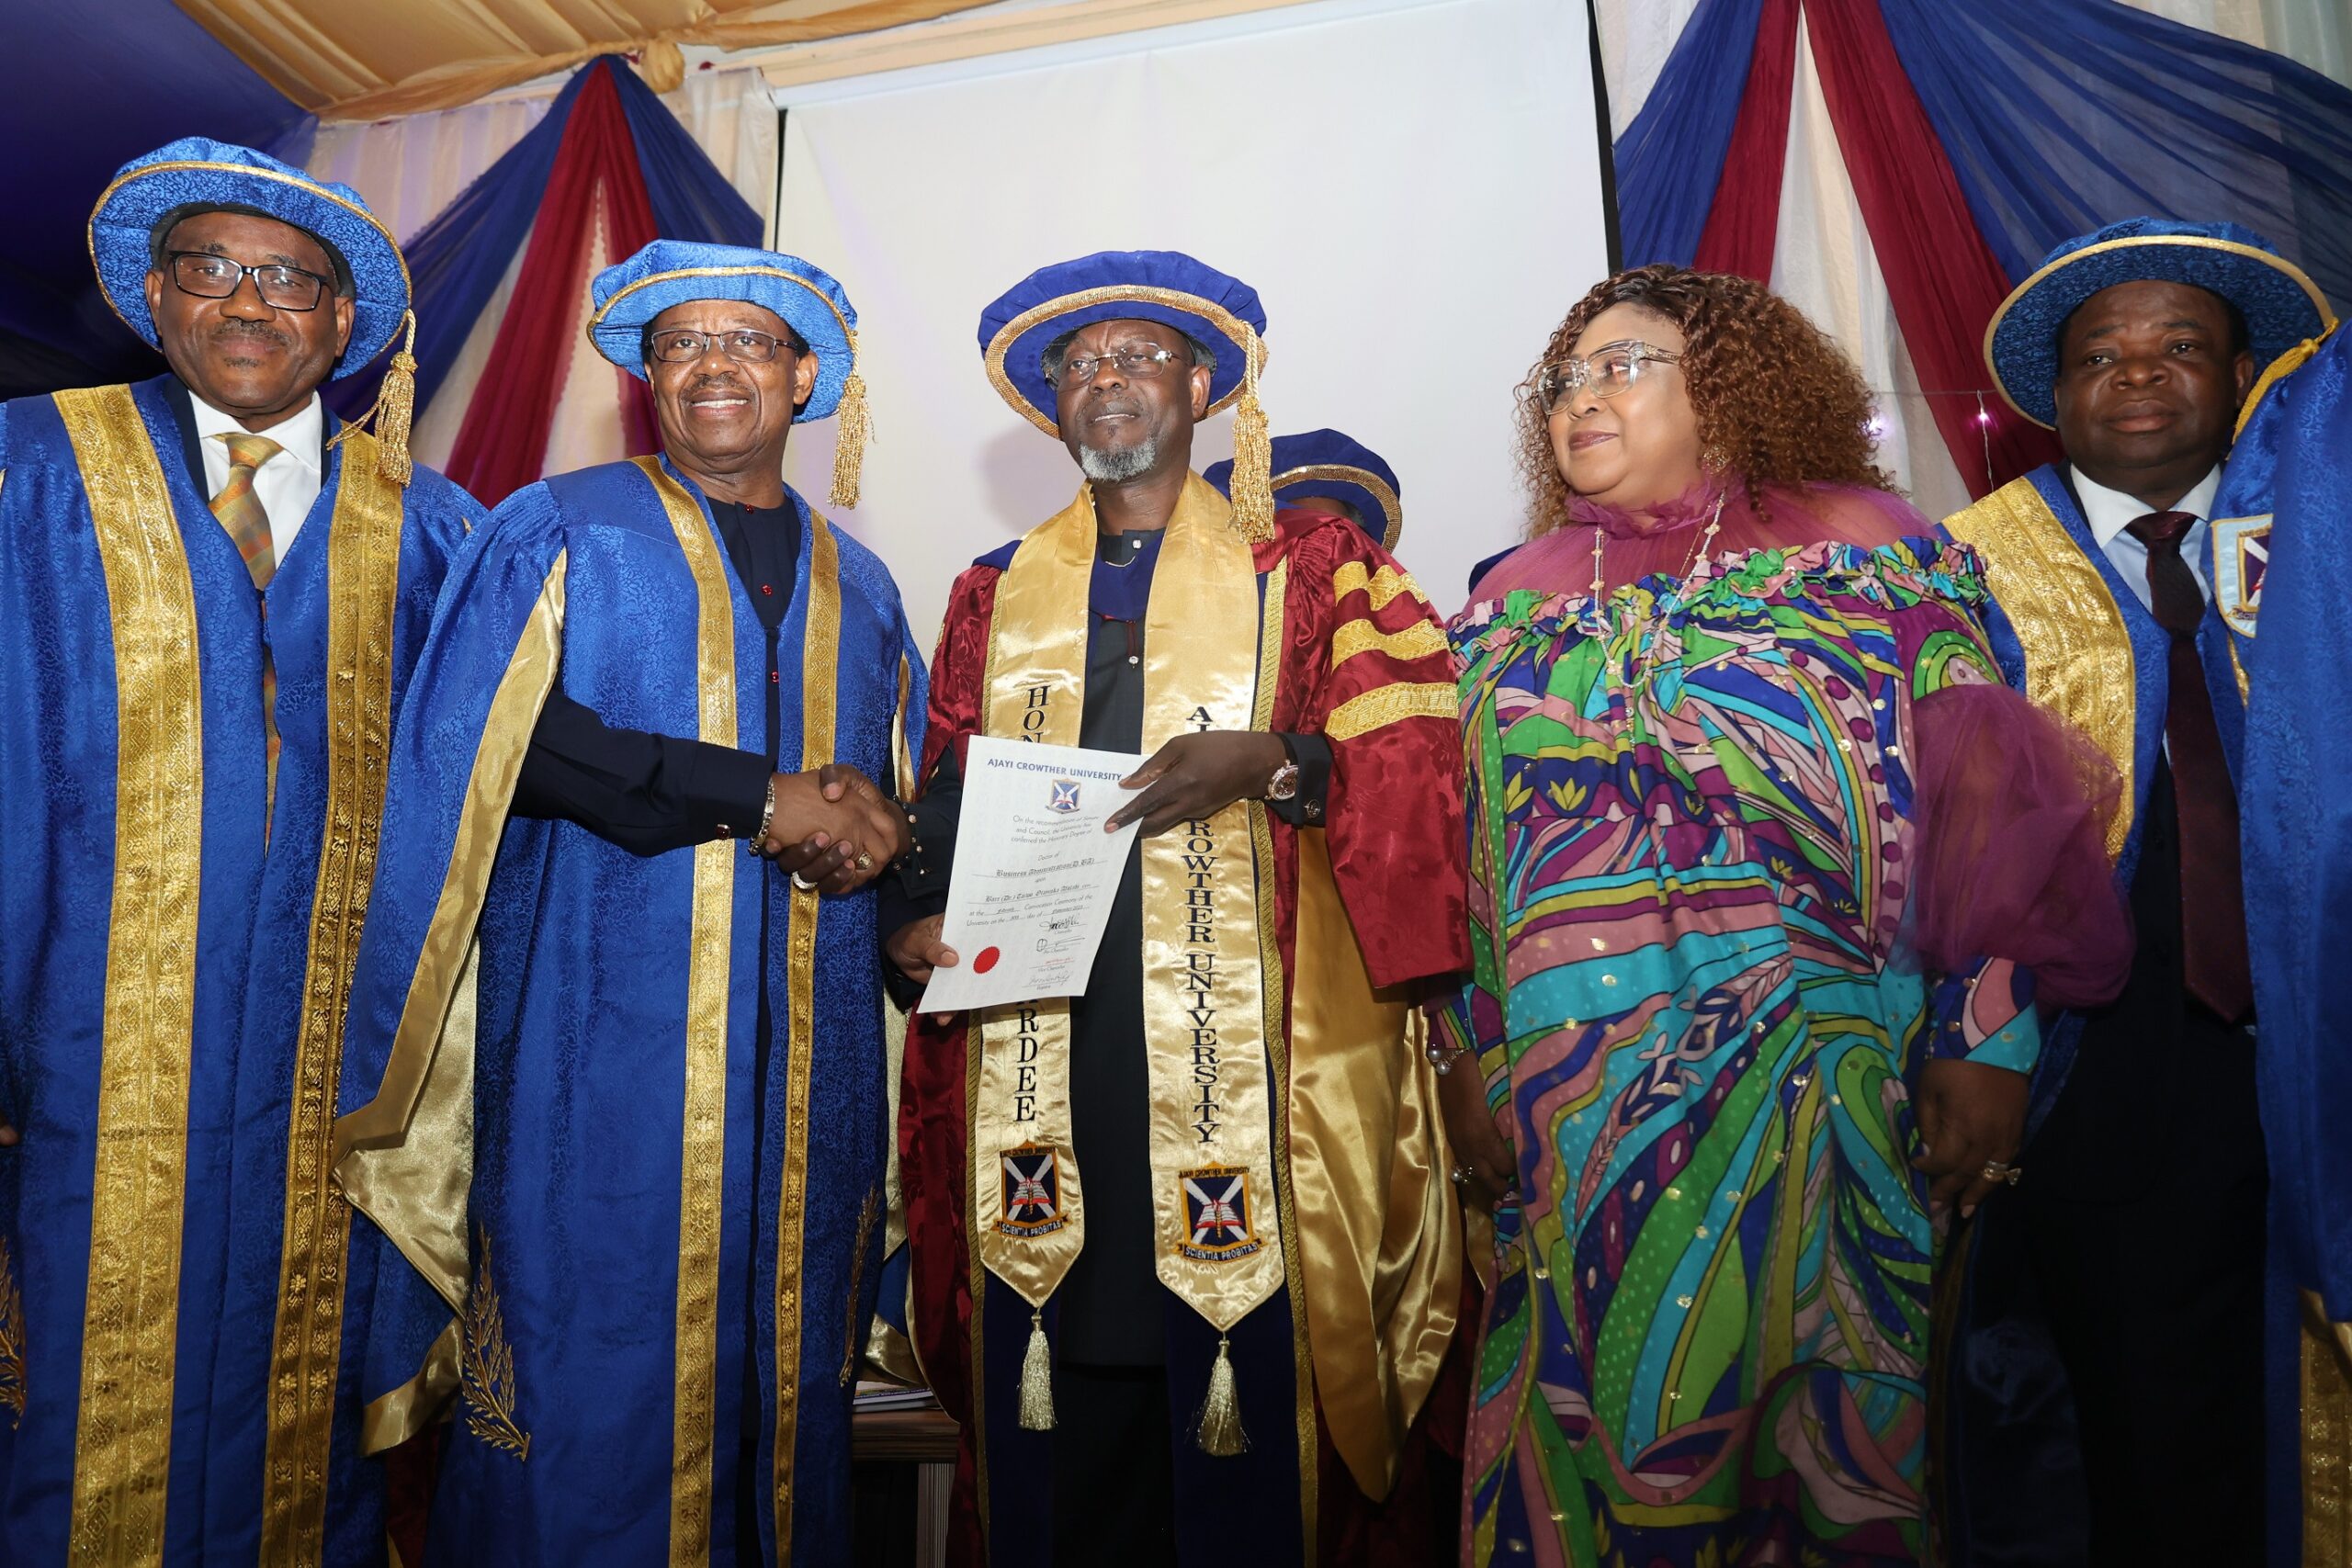 Chairman, SIFAX Group, Afolabi Receives Honorary Doctorate Degree From Ajayi Crowther University